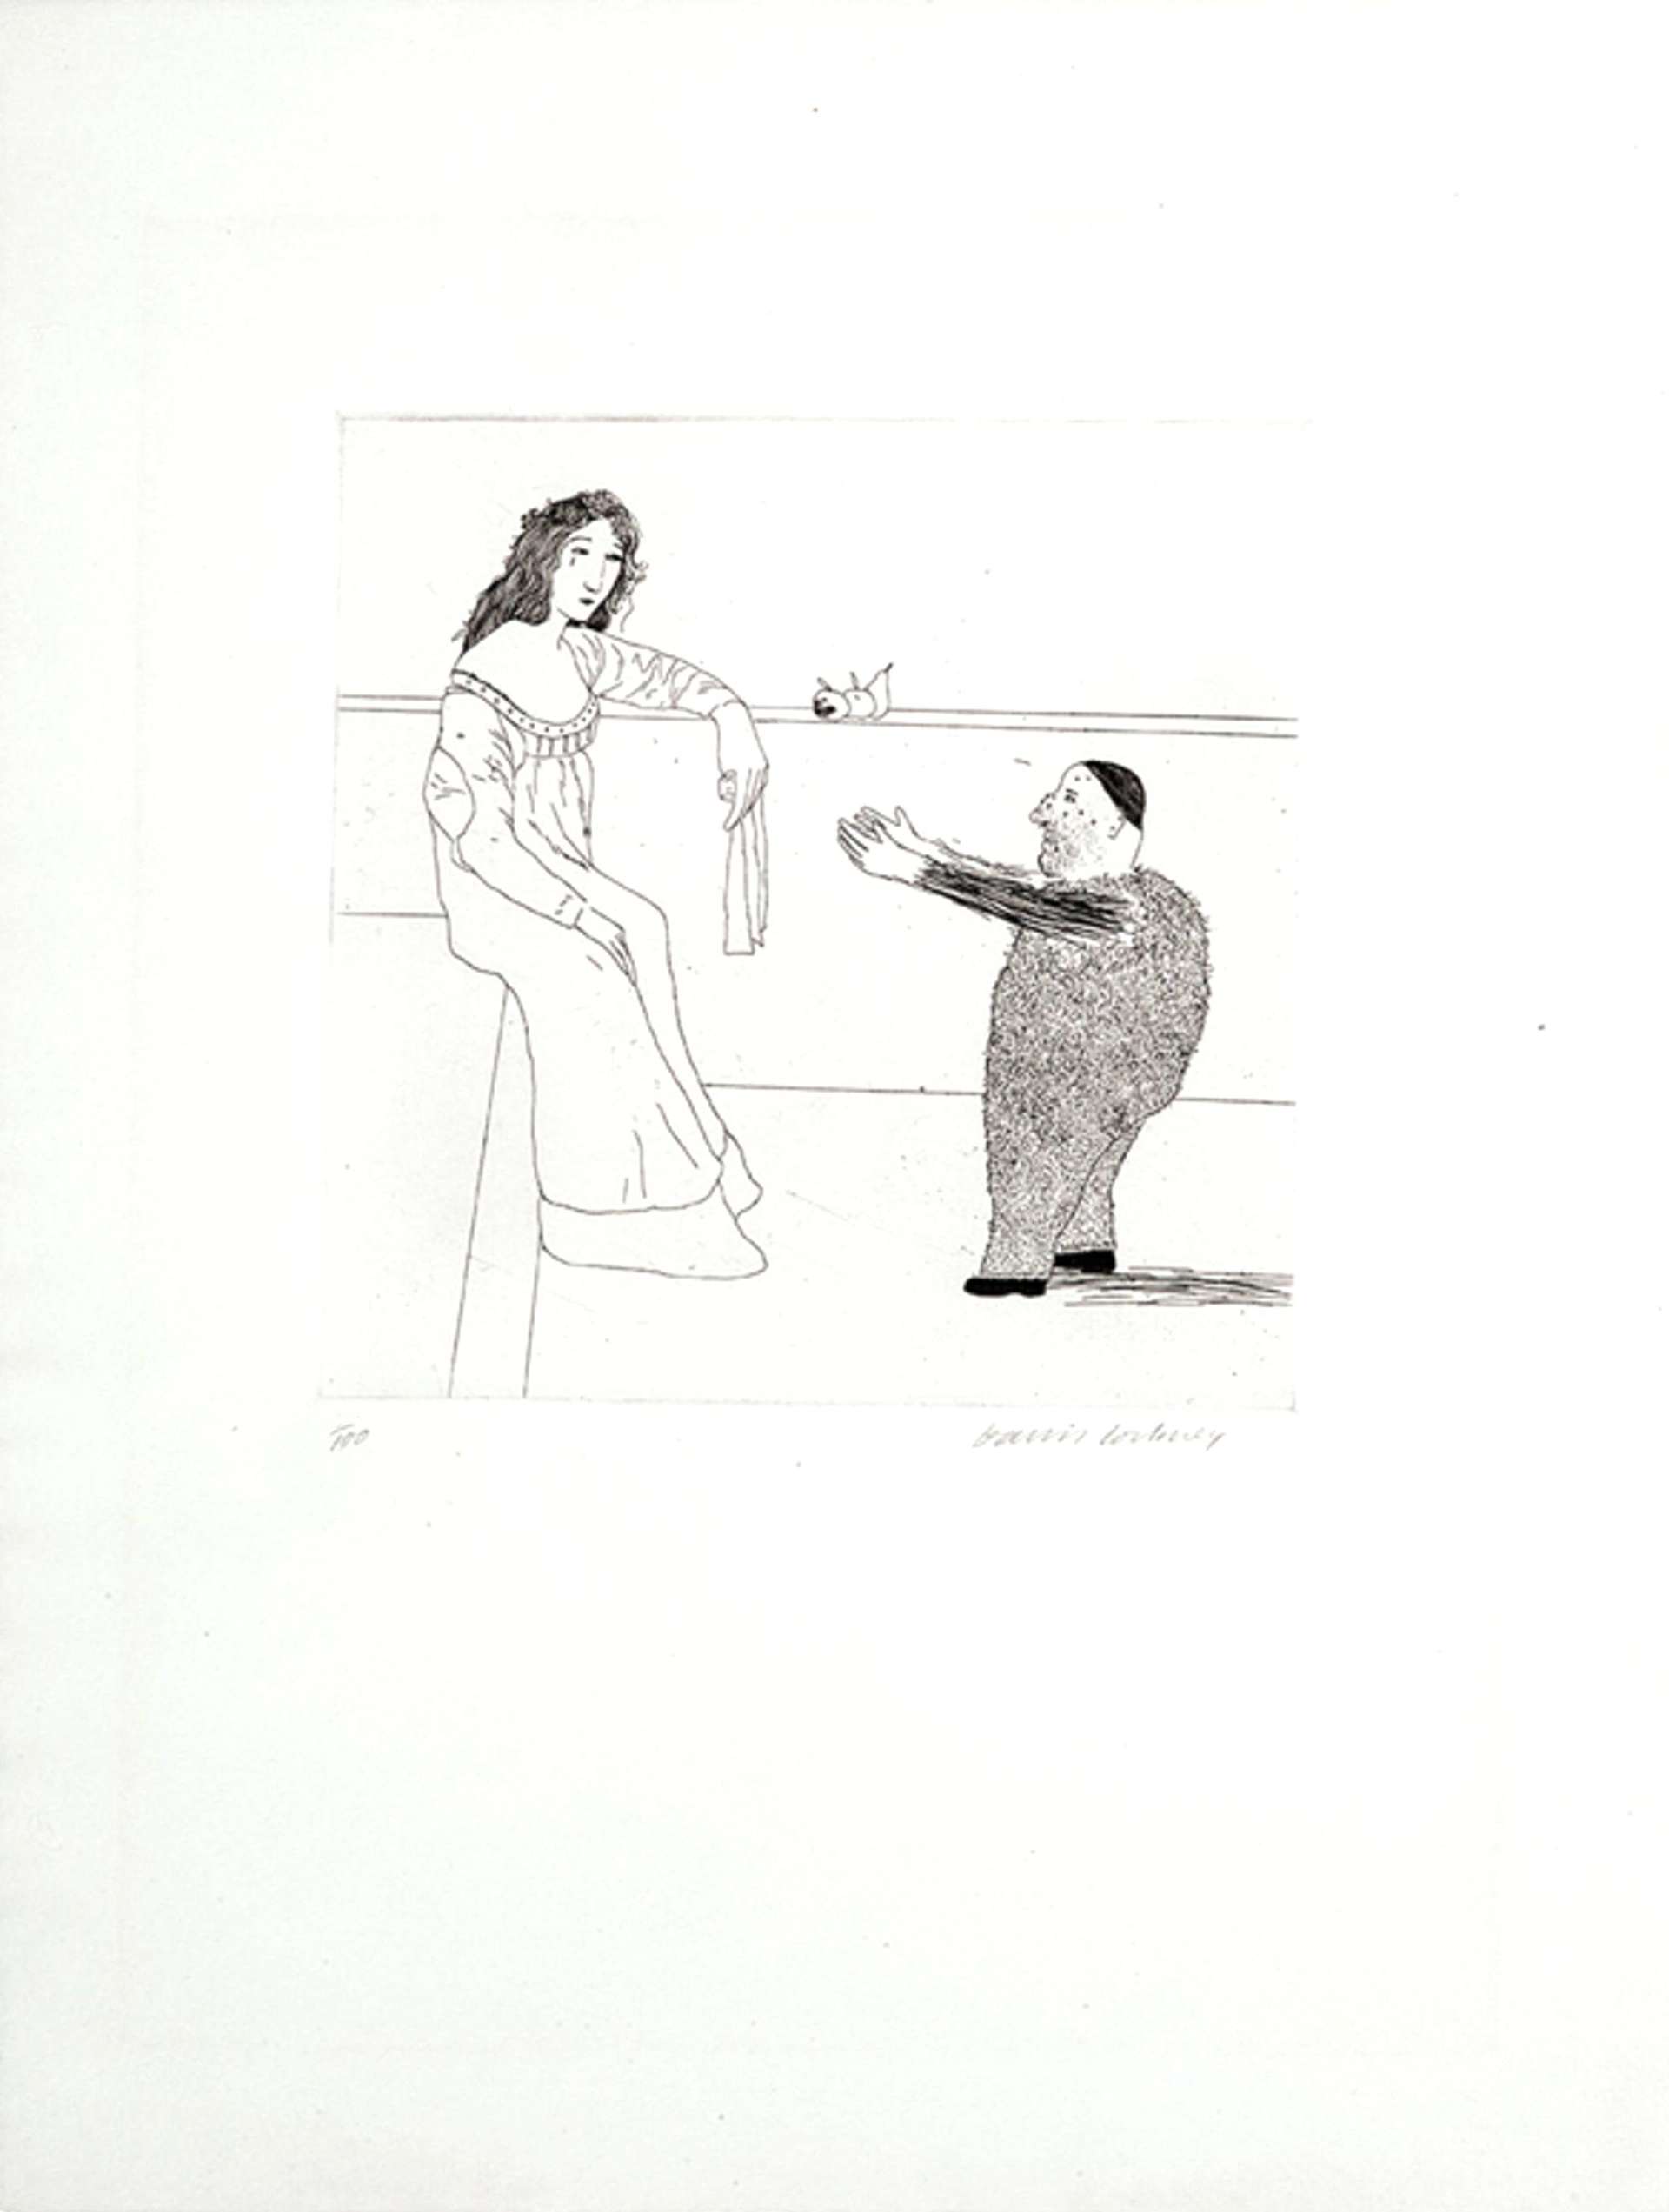 A monochromatic etching by David Hockney depicting a small man reaching up towards a gowned woman on the left